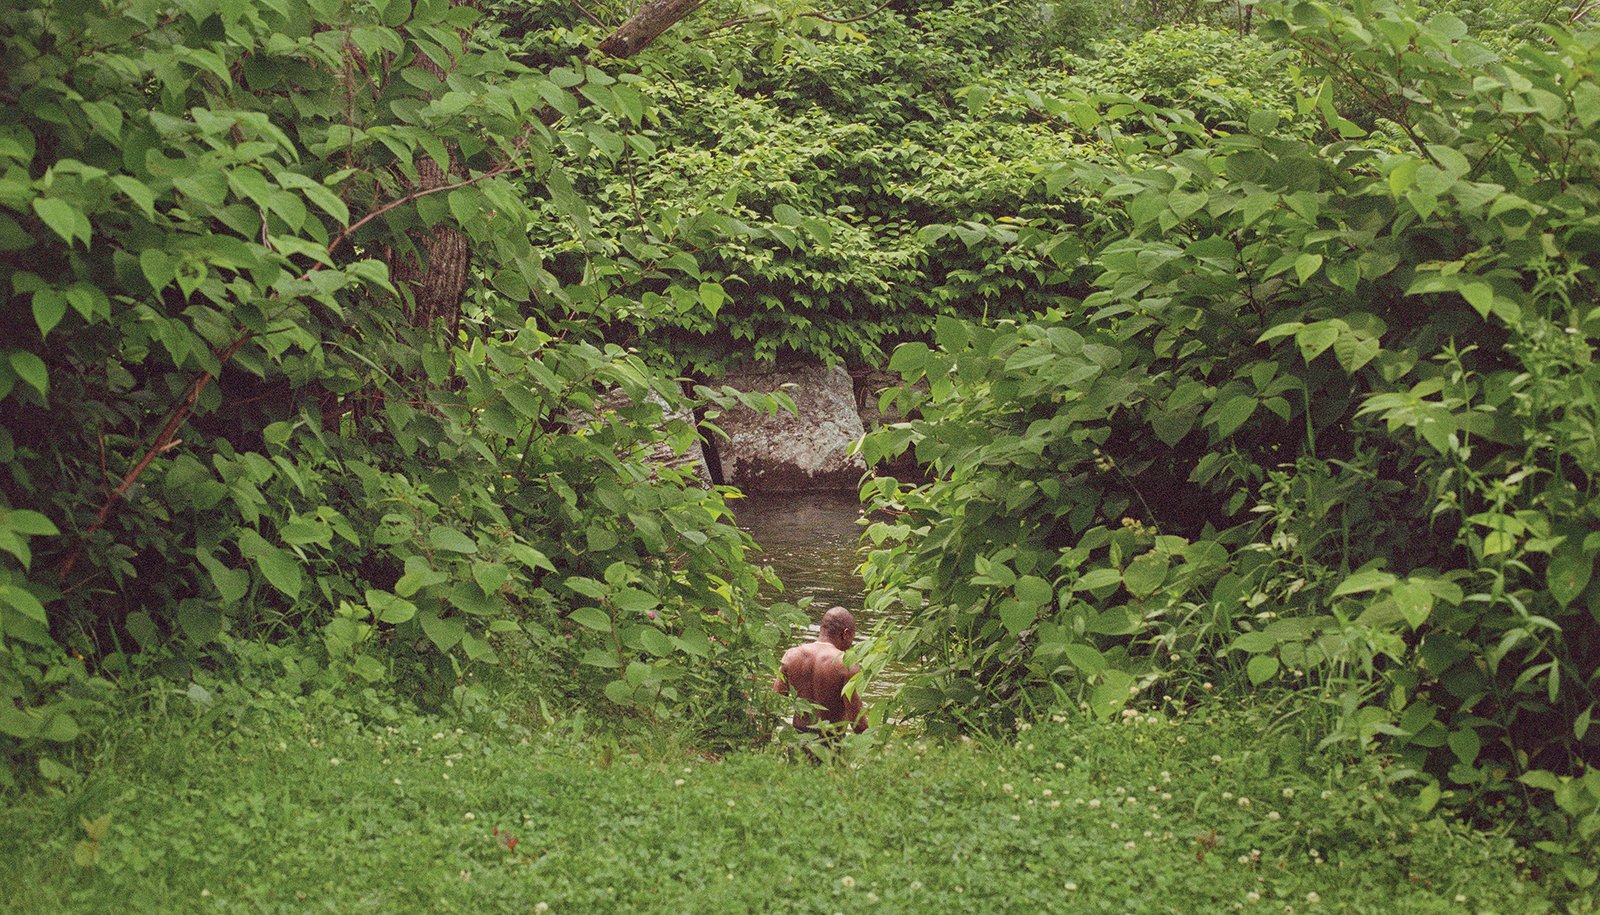 A photograph of a man with his back facing the camera, barely visible amidst luscious green foliage. He appears about to step into a river.